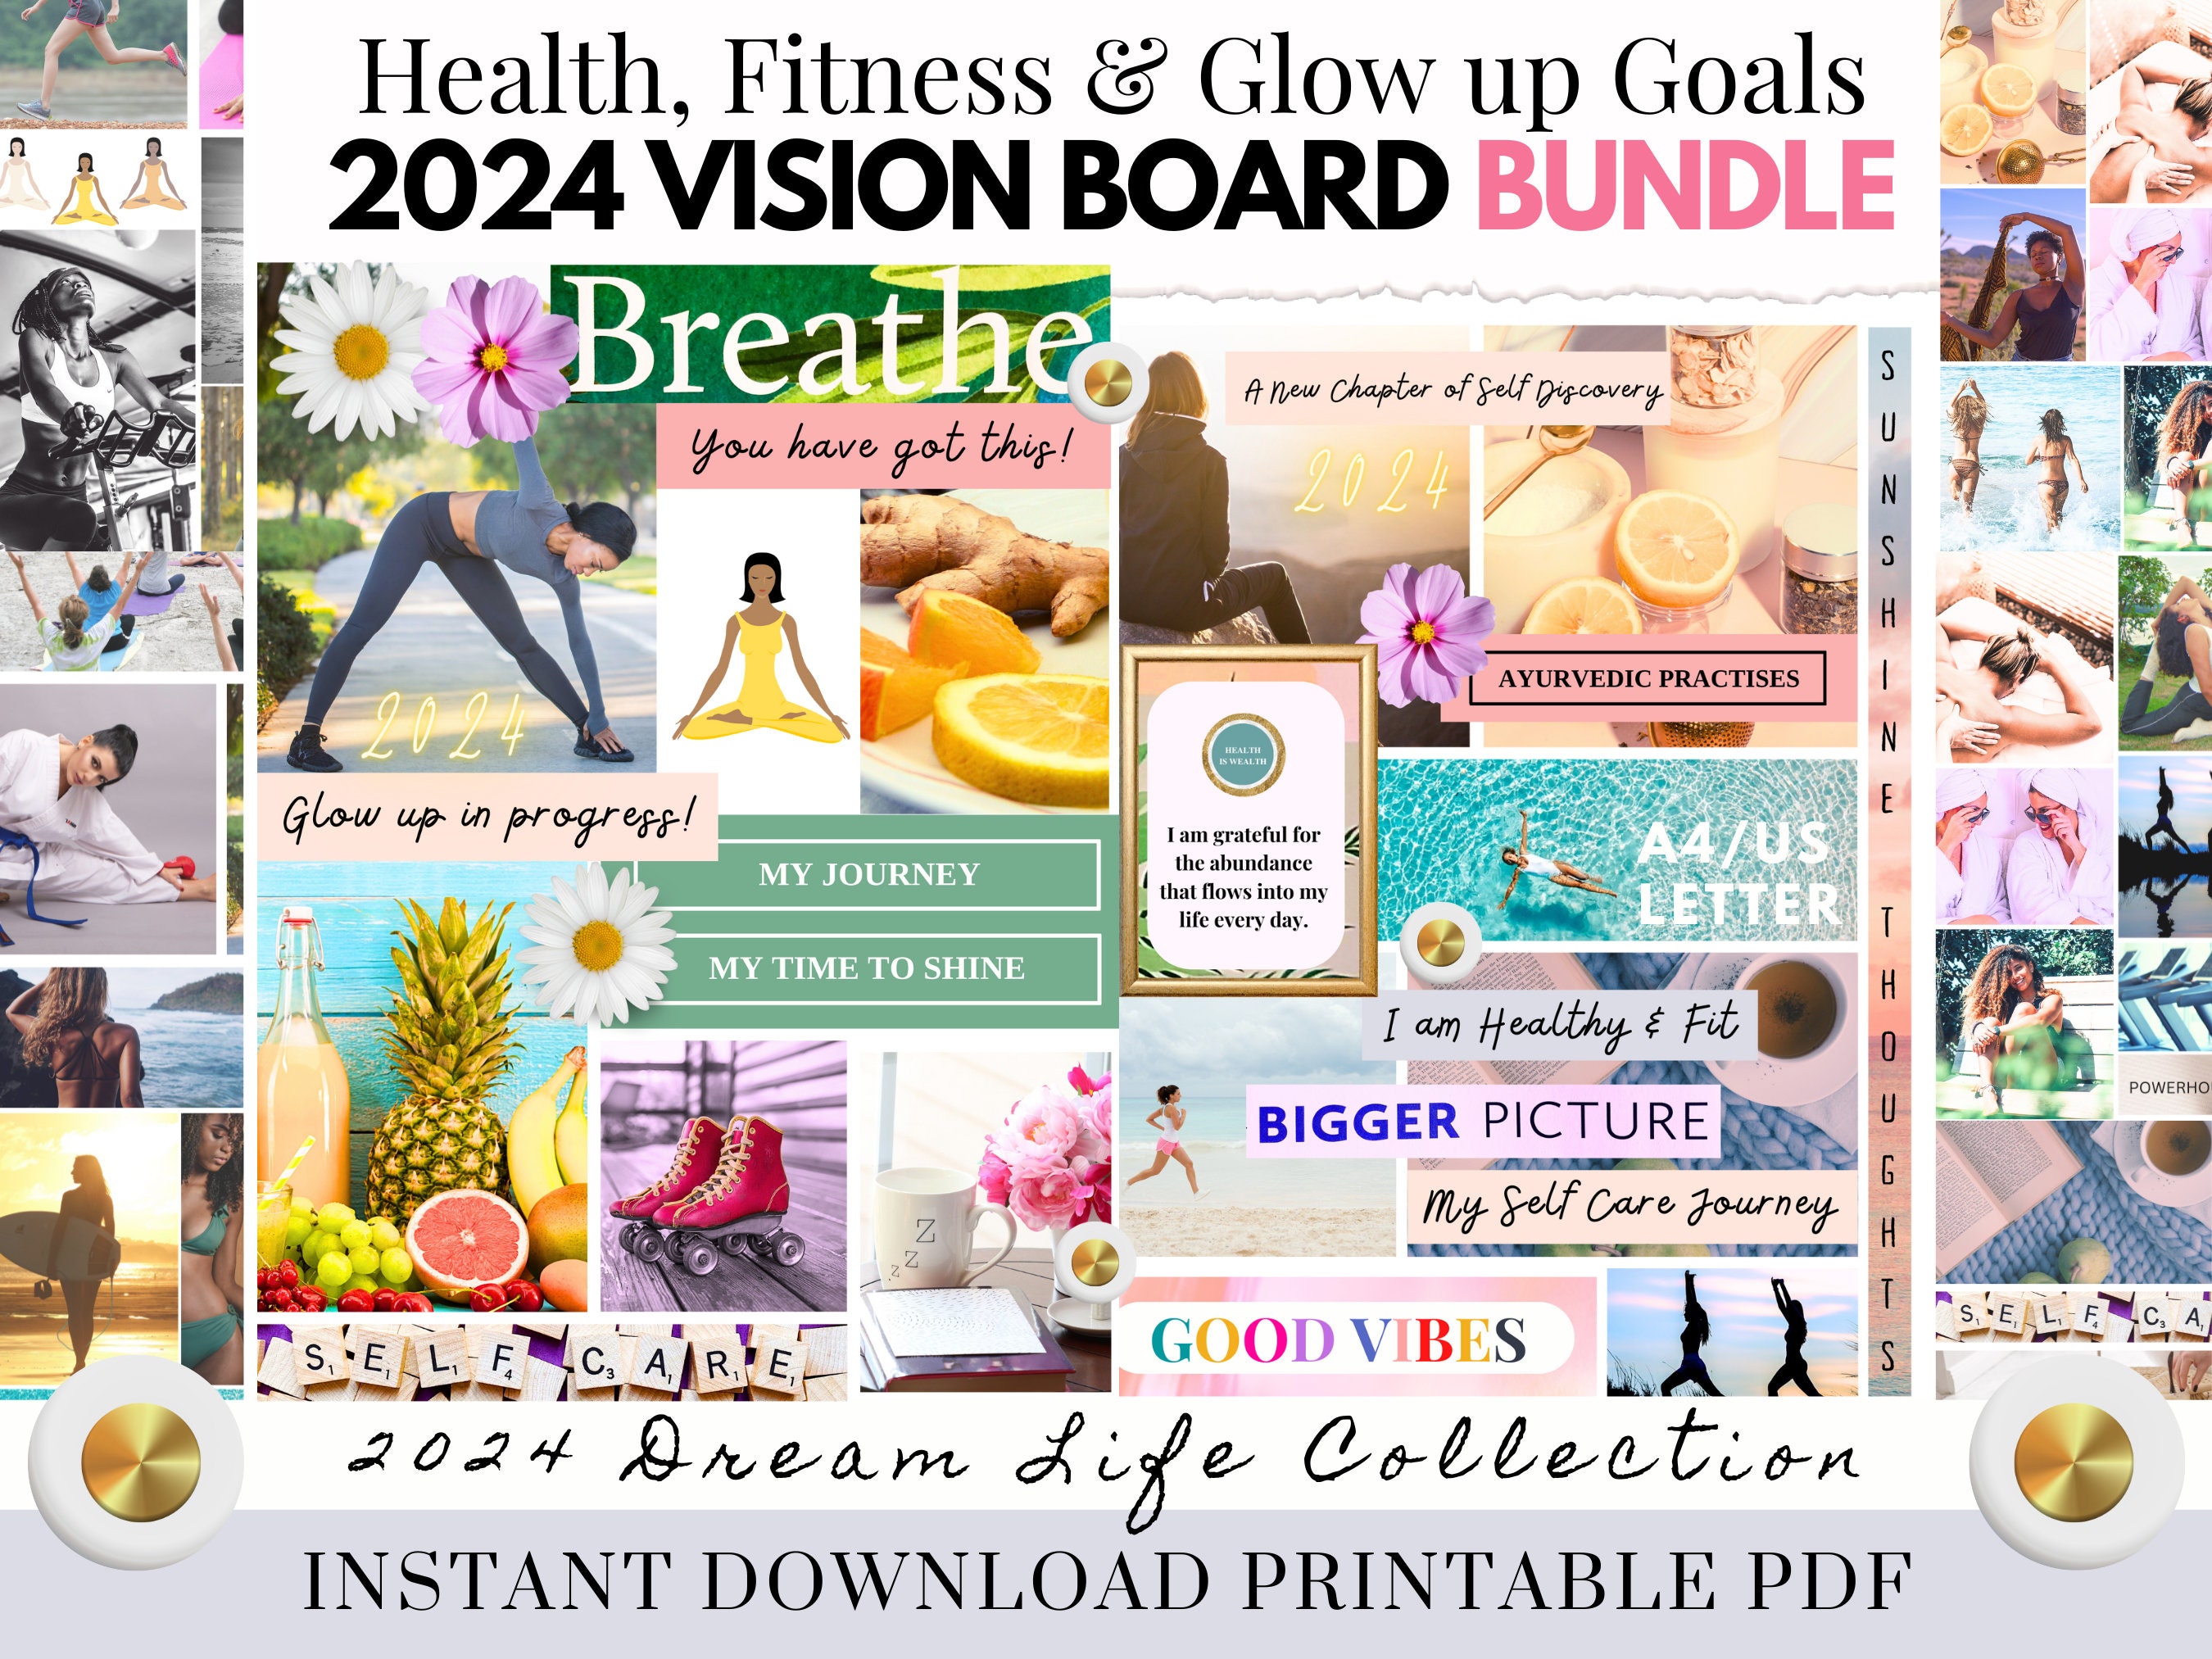 Dream Job & Career Goals Vision Board Clip Art Book: 250+ Pictures, Quotes,  Motivation, new job, interview tips, work smarter, career advice